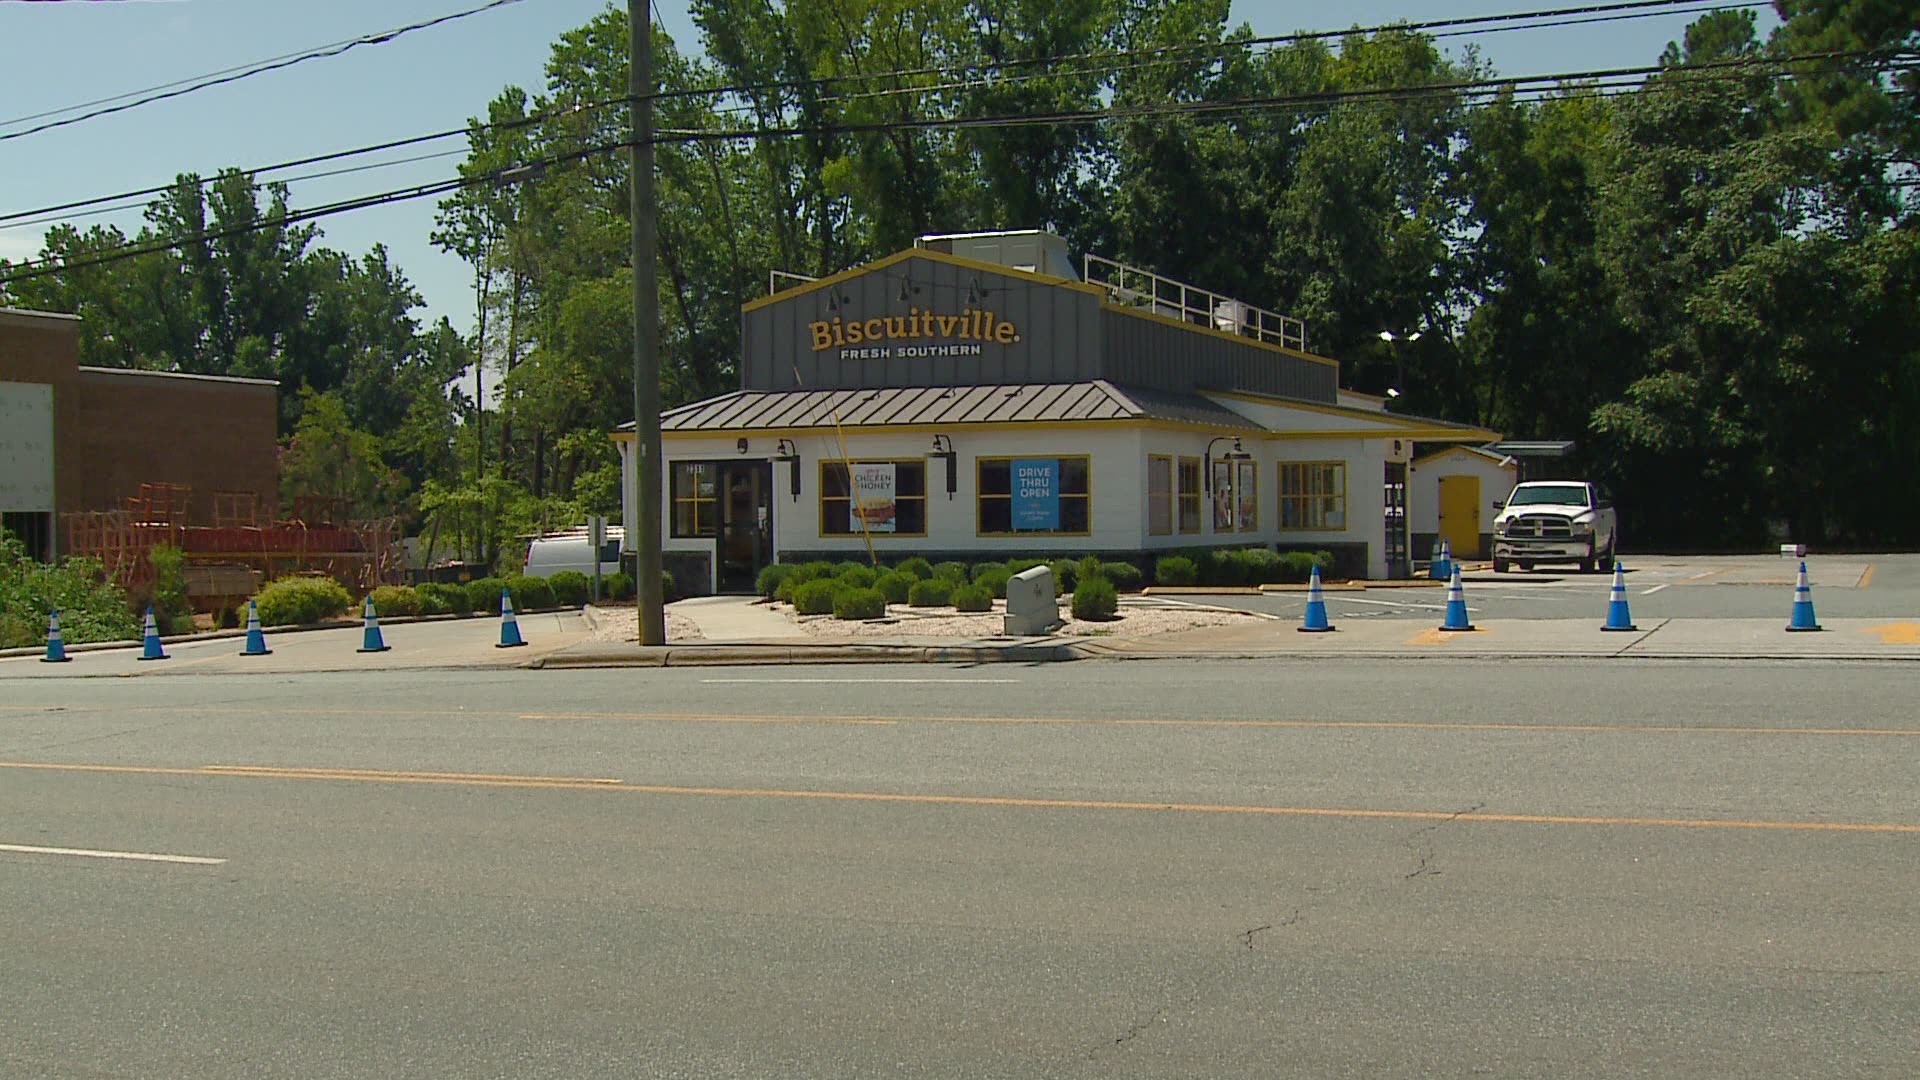 The Biscuitville location on Battleground Ave. in Greensboro has temporarily closed its doors for cleaning after an employee tested positive for COVID-19.